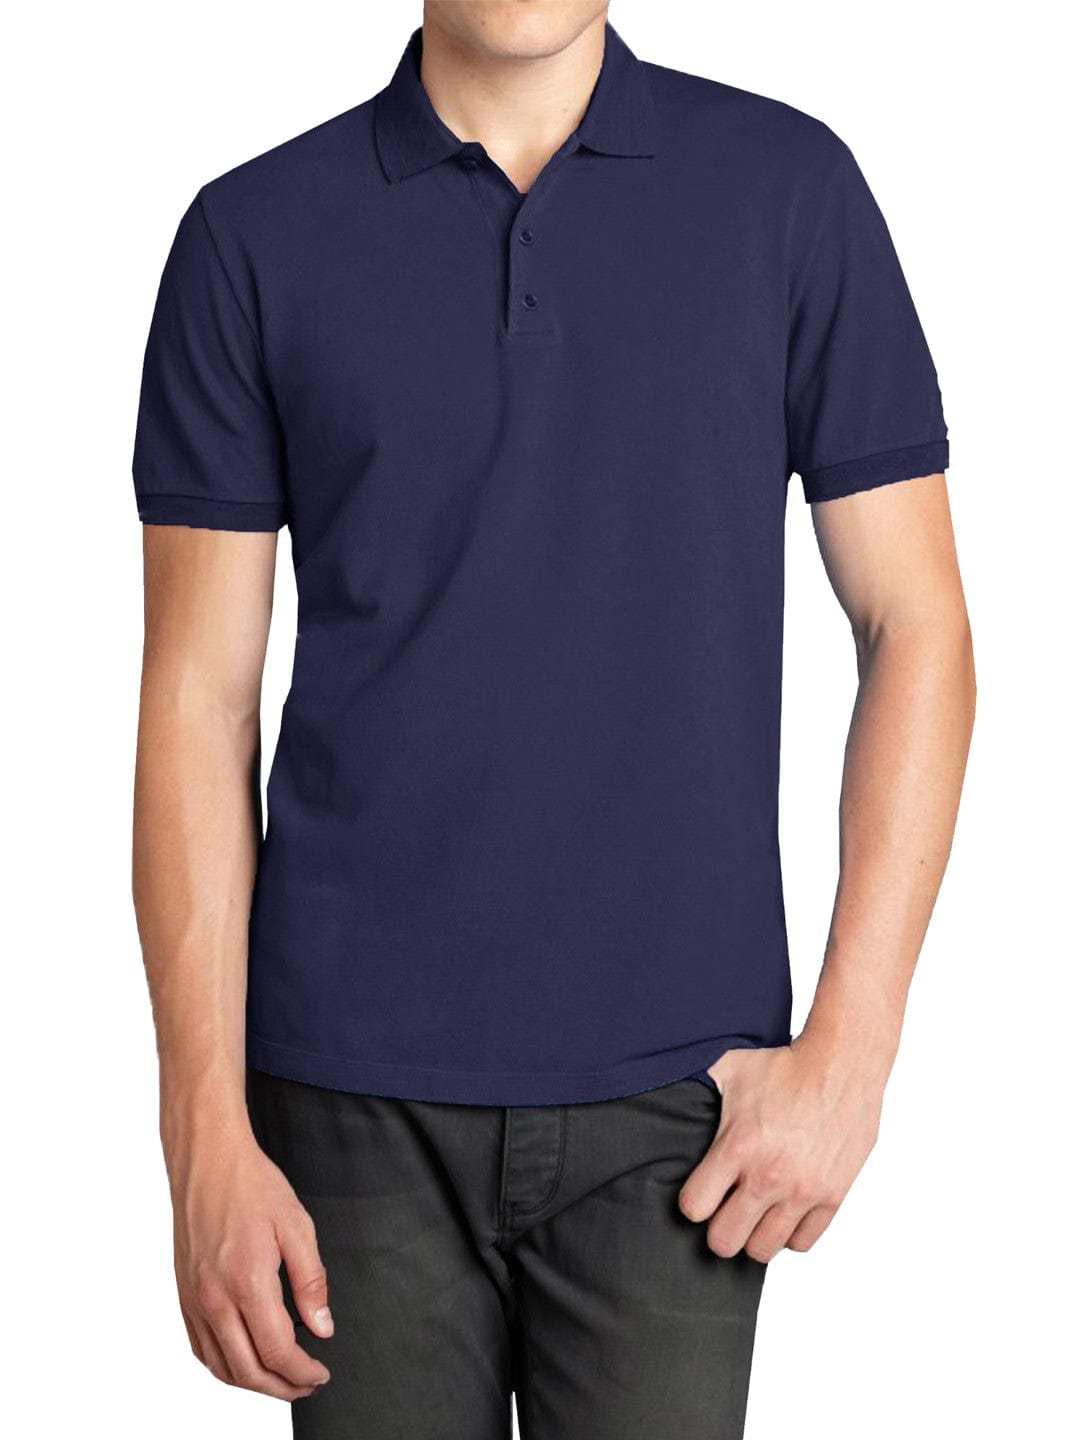 GalaxybyHarvic Men's Basic Cotton Blend Polo Shirt Charcoal / 2XL